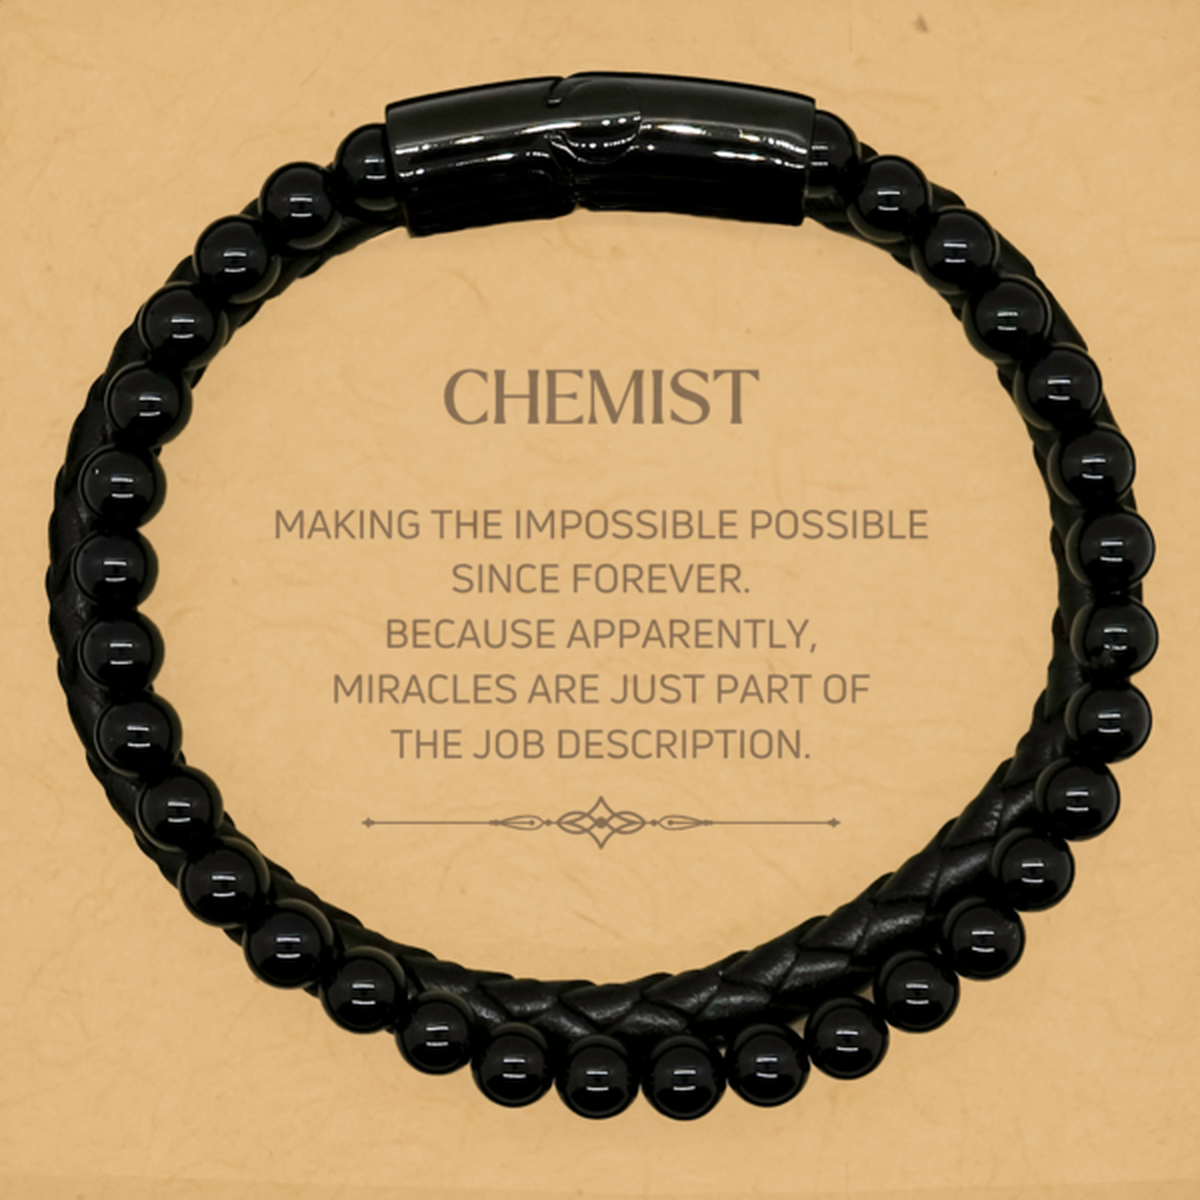 Funny Chemist Gifts, Miracles are just part of the job description, Inspirational Birthday Stone Leather Bracelets For Chemist, Men, Women, Coworkers, Friends, Boss